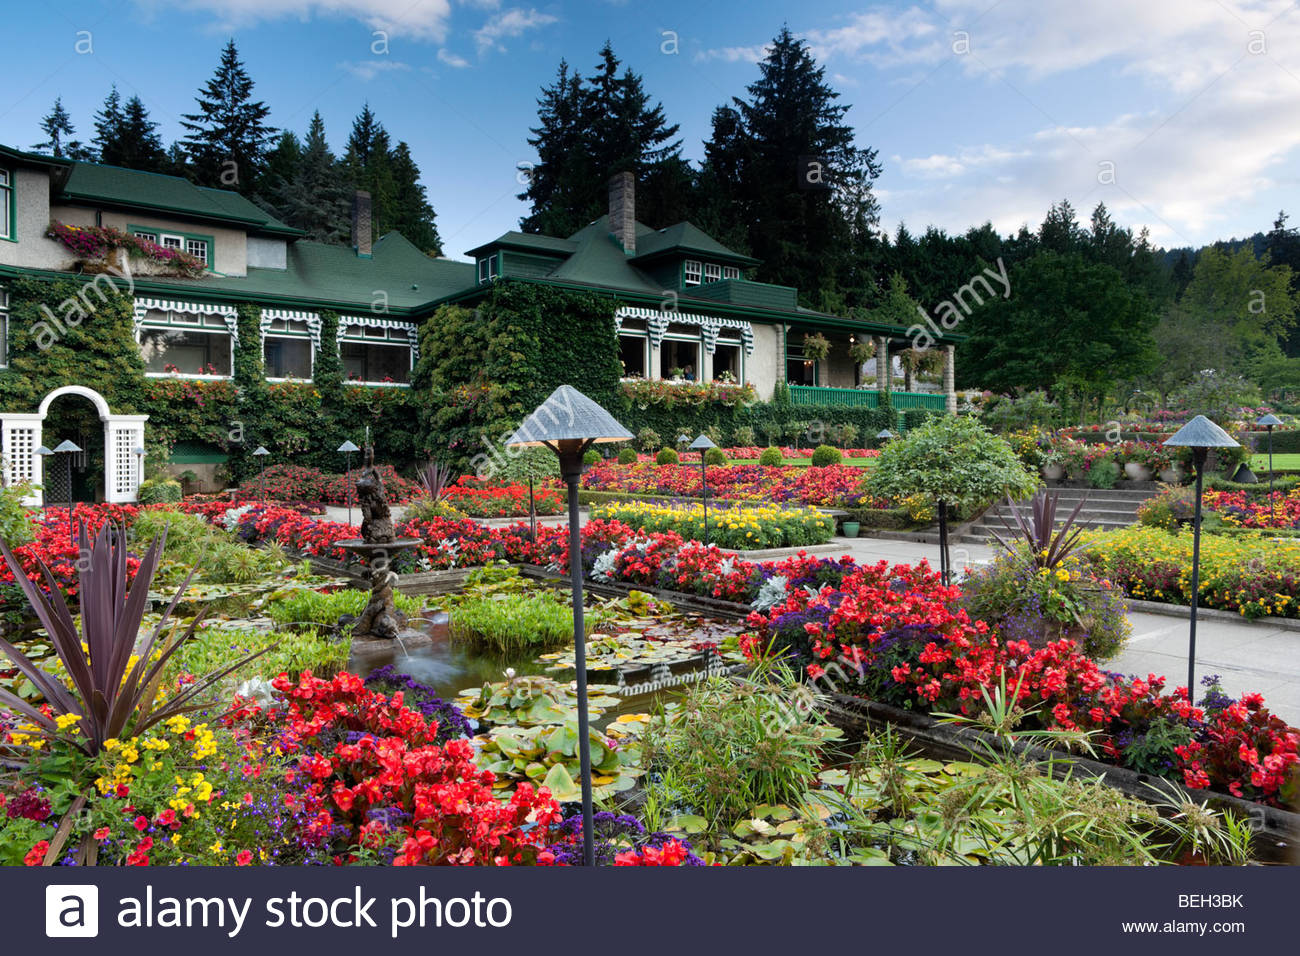 Italian Garden And Dining Room Restaurant At The Butchart Gardens